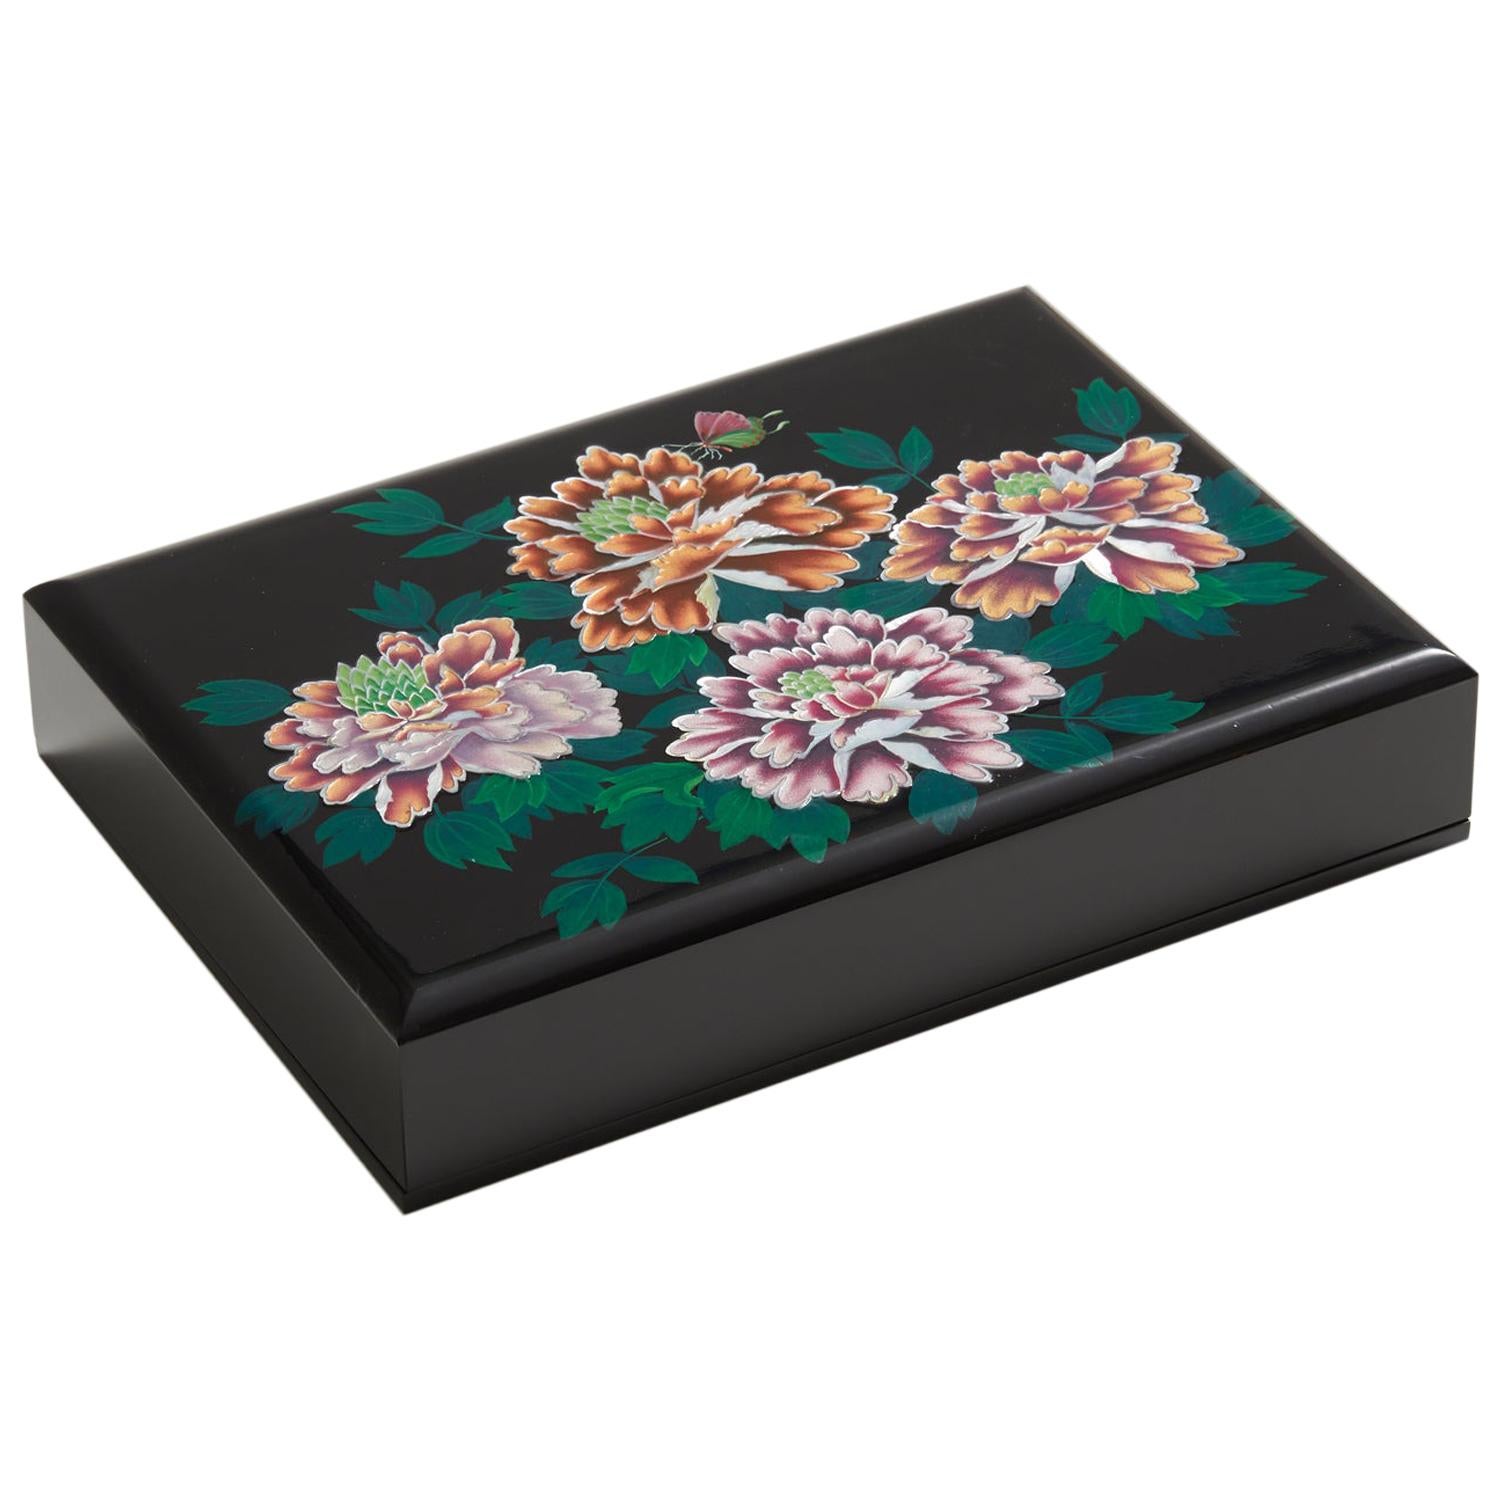 Floral Design Mother of Pearl Box with Peony Blossoms by Arijian  For Sale